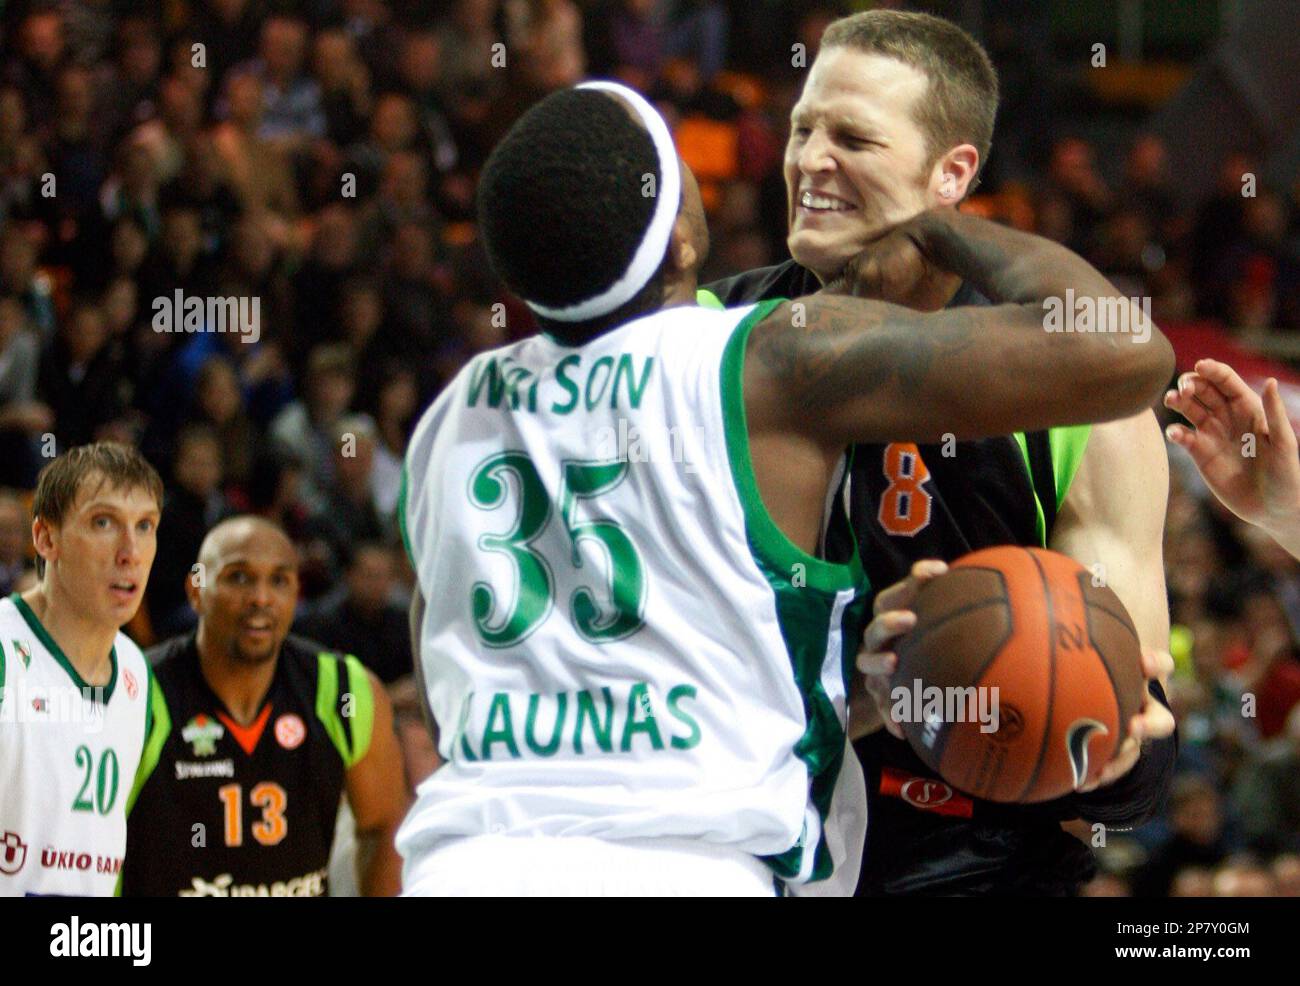 Travis Watson, left, of Lithuanian BC Zalgiris vies for the ball with Curtis Borchardt of French team BC Asvel Villeurbanne during a Euroleague match in Kaunas, Lithuania,Wednesday, Oct. 21, 2009. (AP Photo/Mindaugas Kulbis) Foto Stock